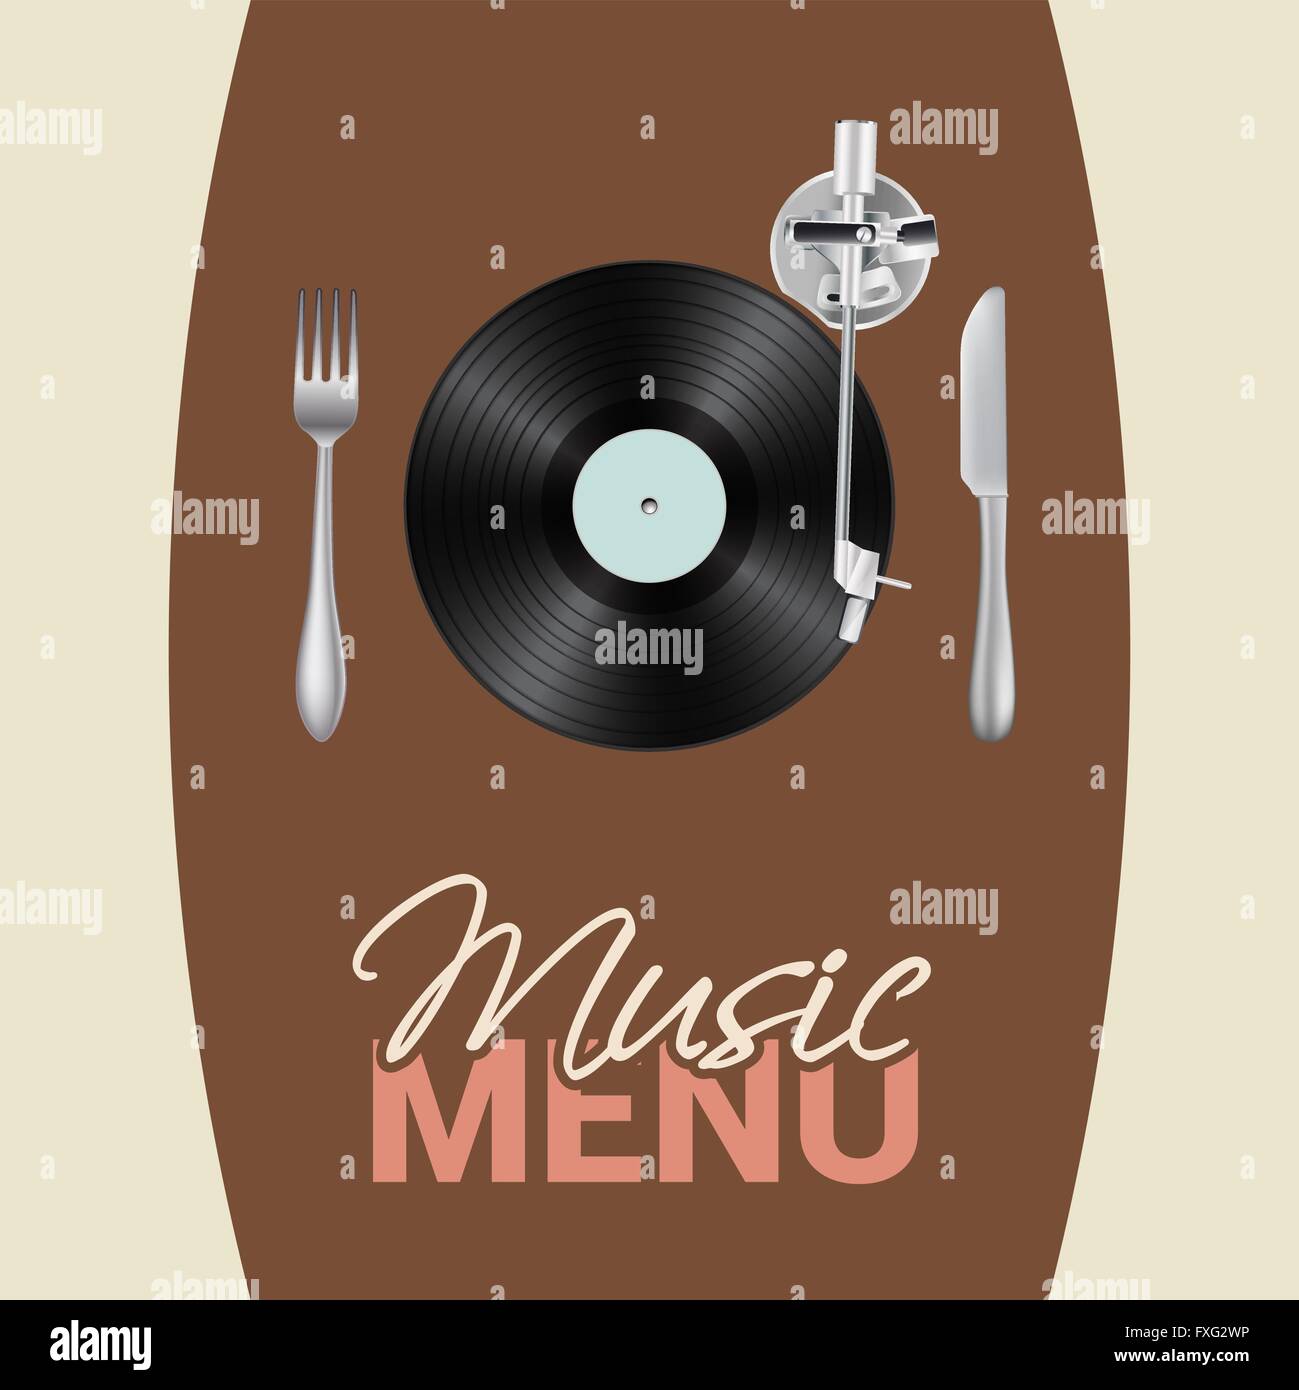 music menu conceptual illustration with vinyl turntable, knife, fork, text Stock Vector